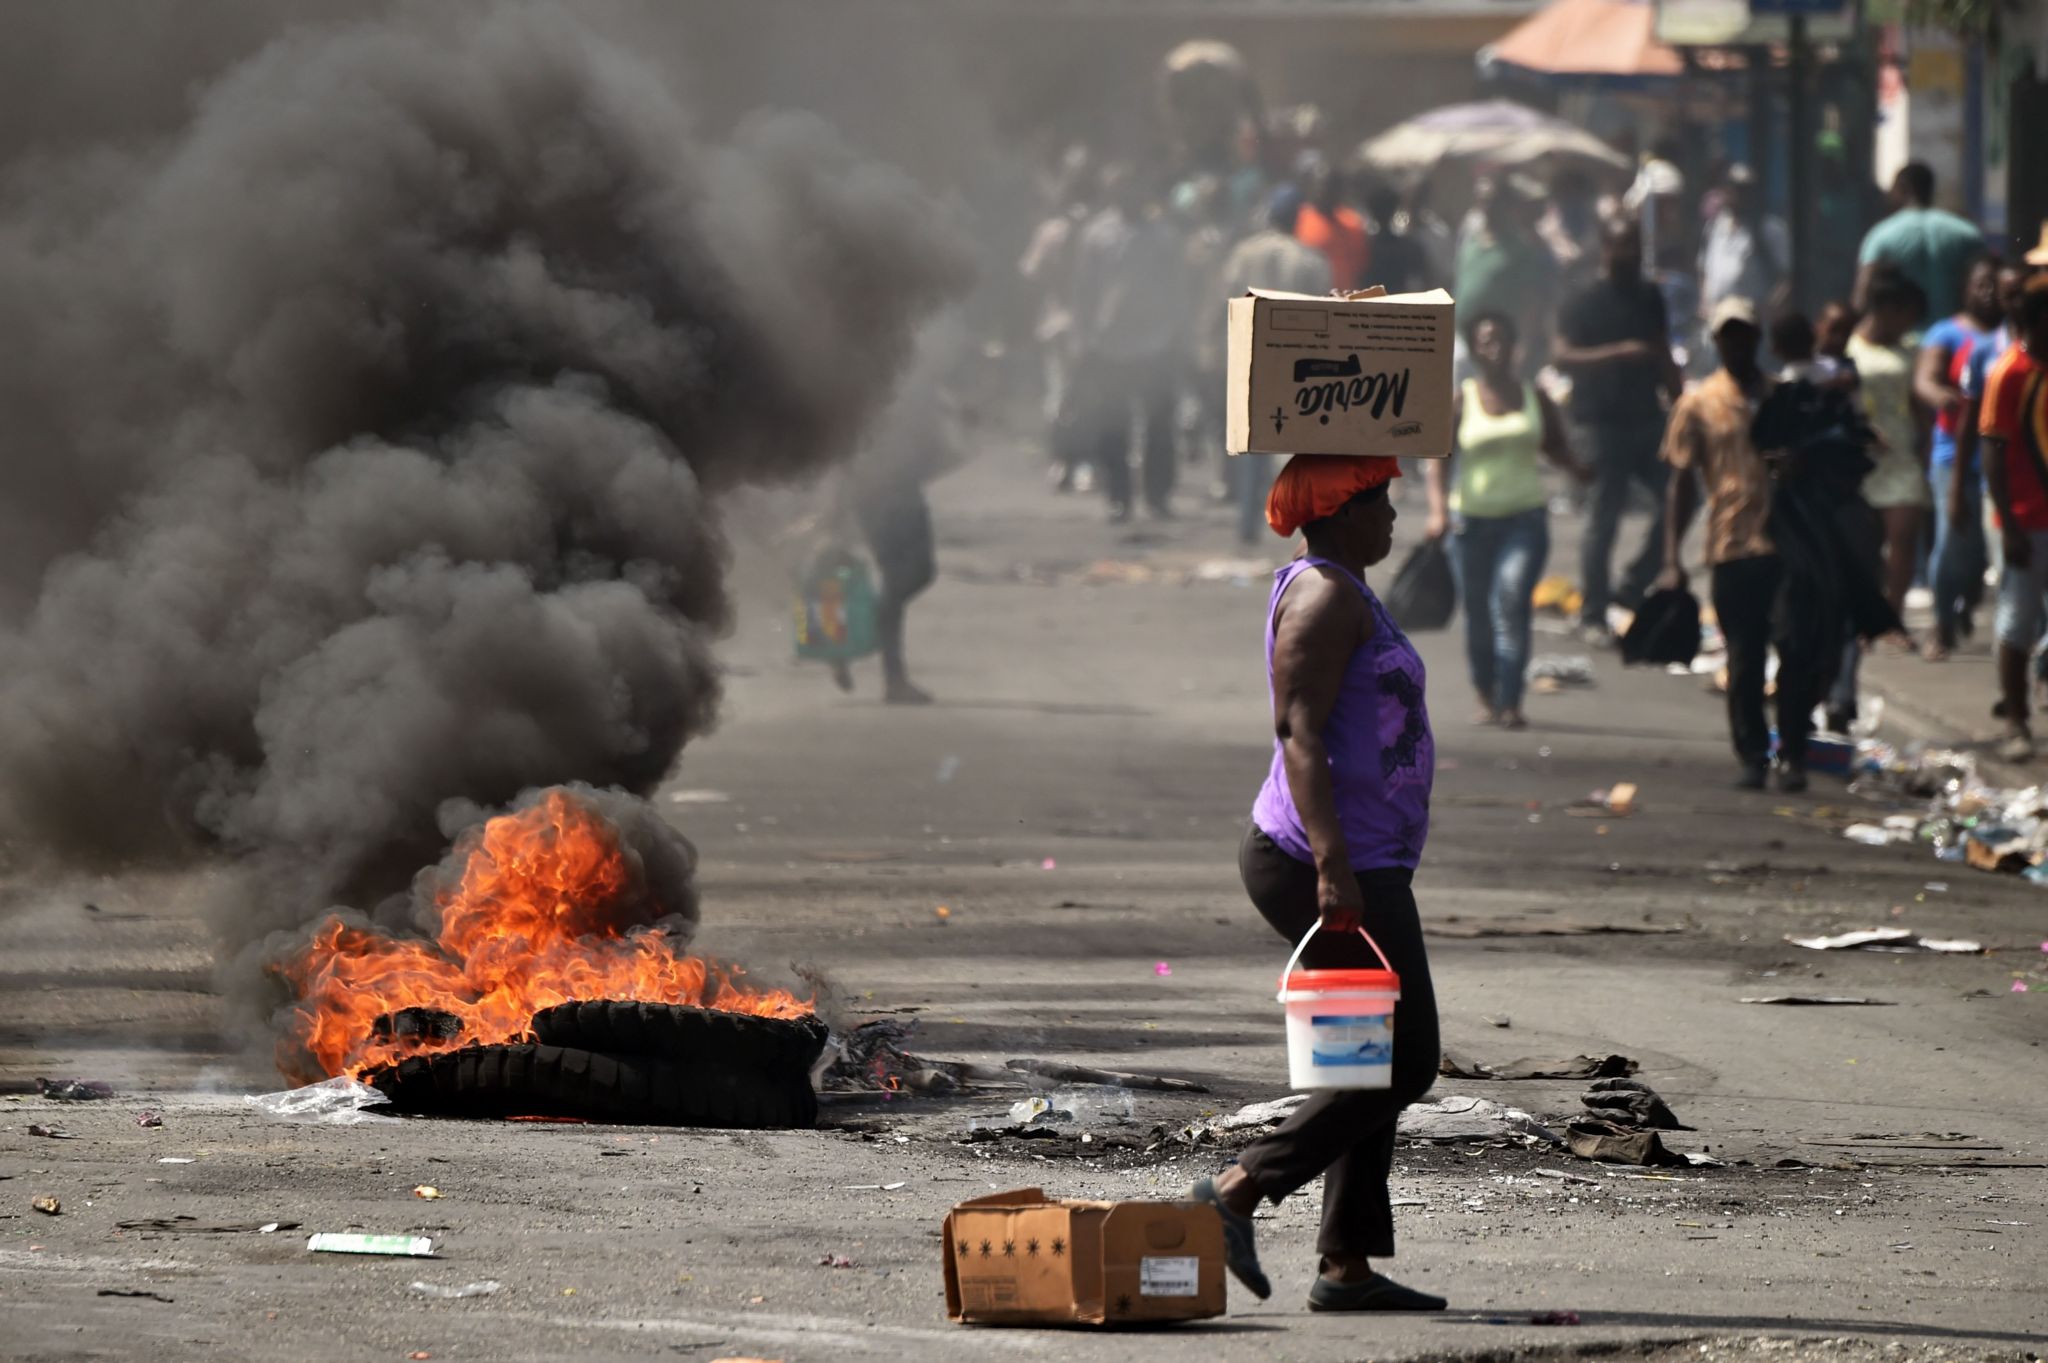 A tire placed by a small group of demonstrators burns on a street in the commune of Petion Ville in the Haitan capital Port-au-Prince